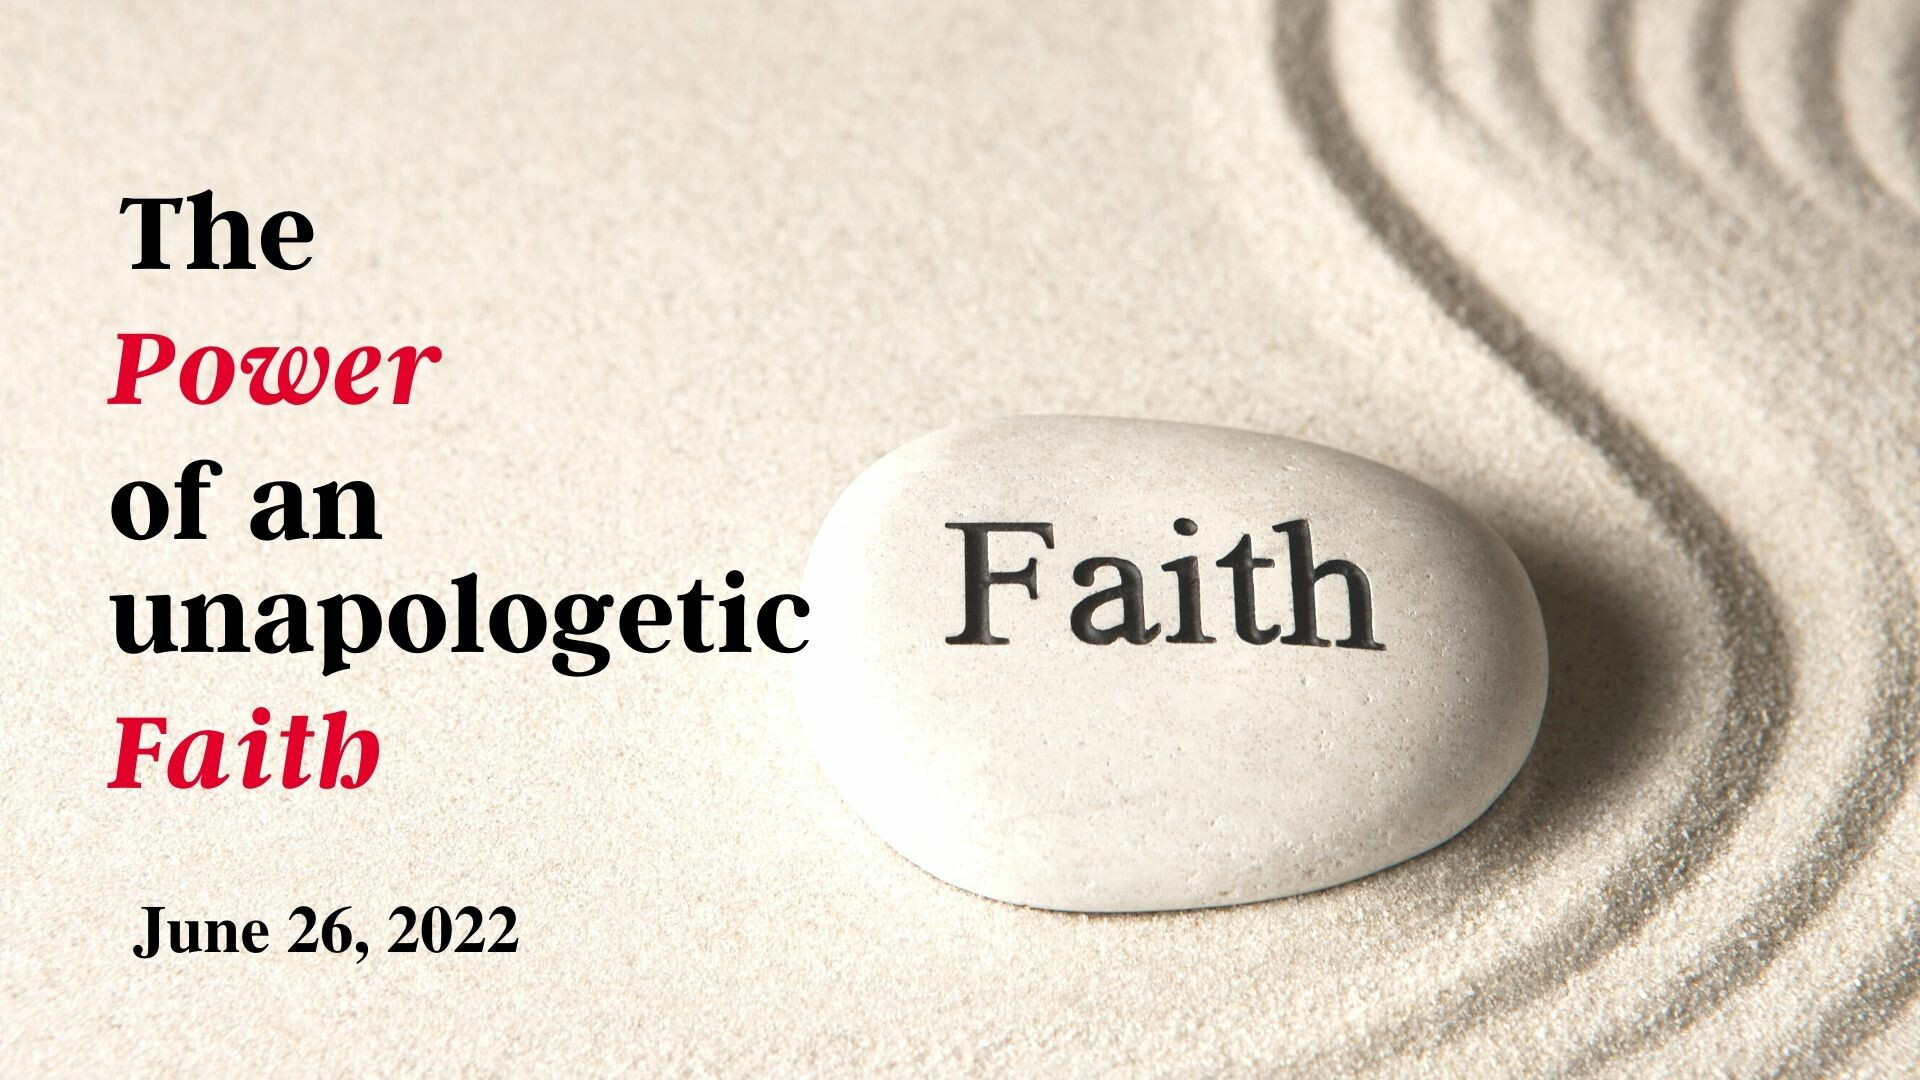 10:45 AM The power of an unapologetic faith